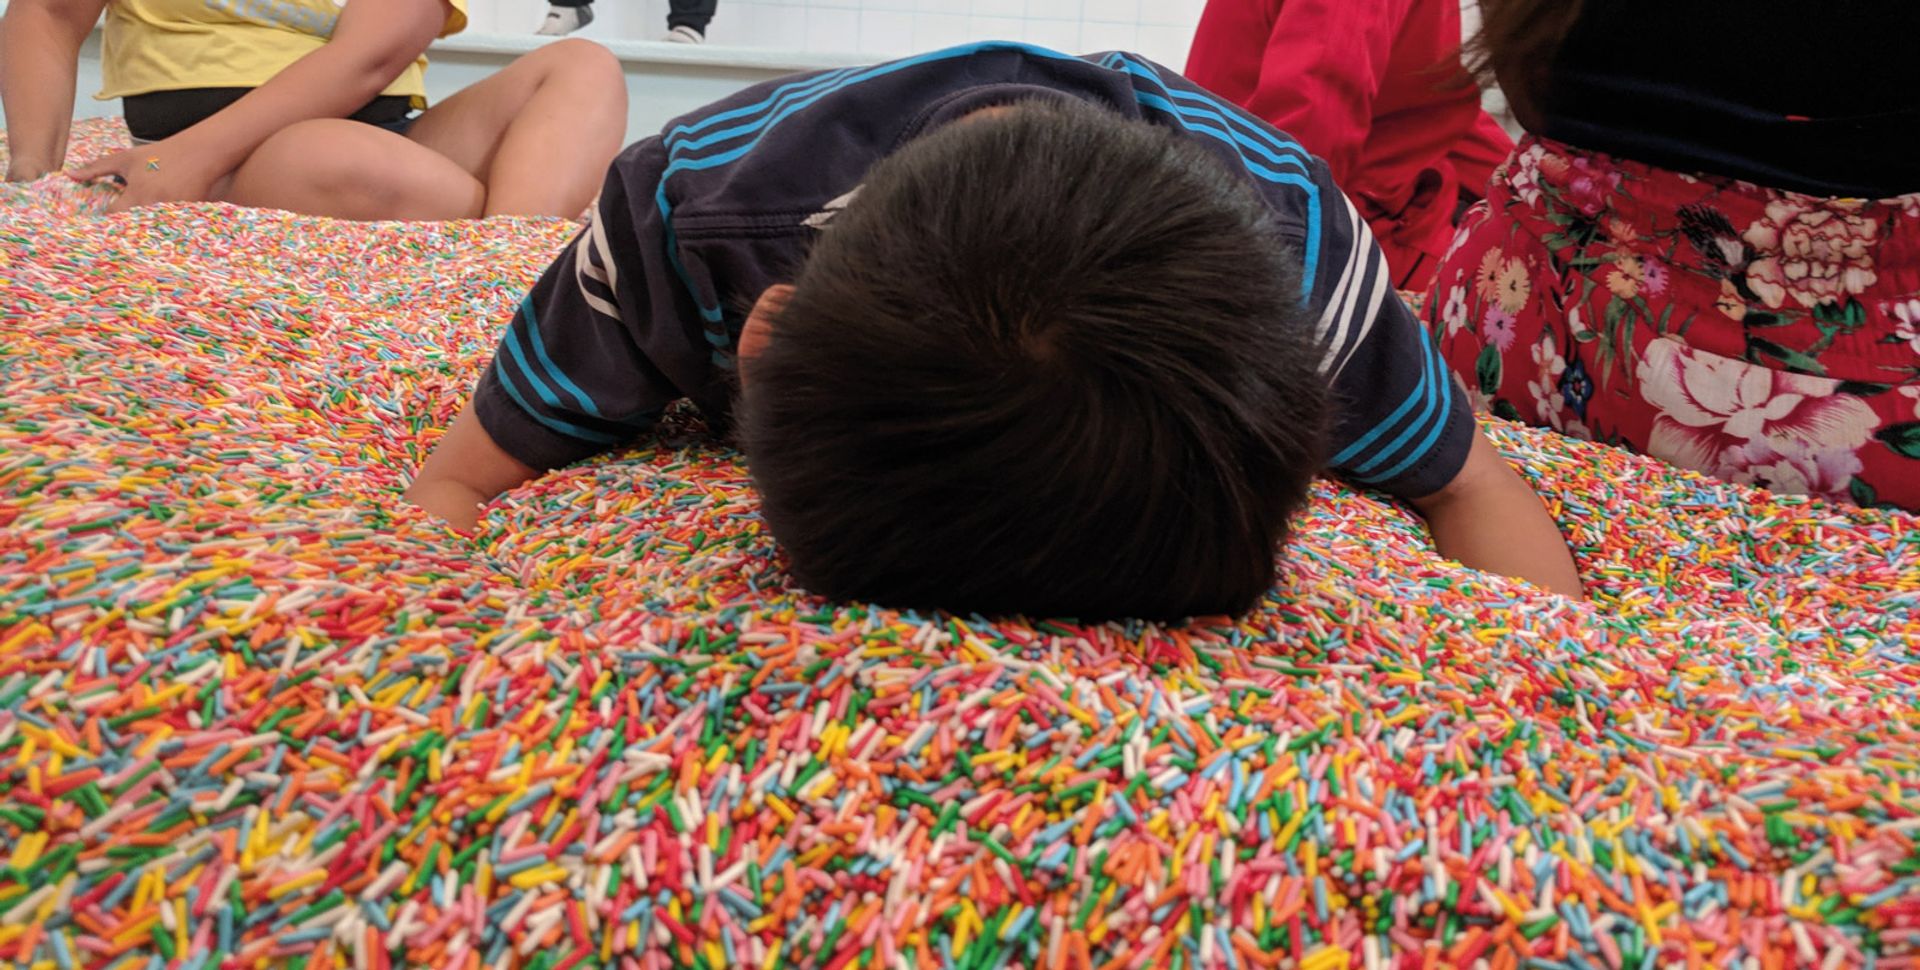 The Museum of Ice Cream in San Francisco is too much for one visitor (© mliu92/Flickr) The Museum of Ice Cream in San Francisco is too much for one visitor (© mliu92/Flickr)